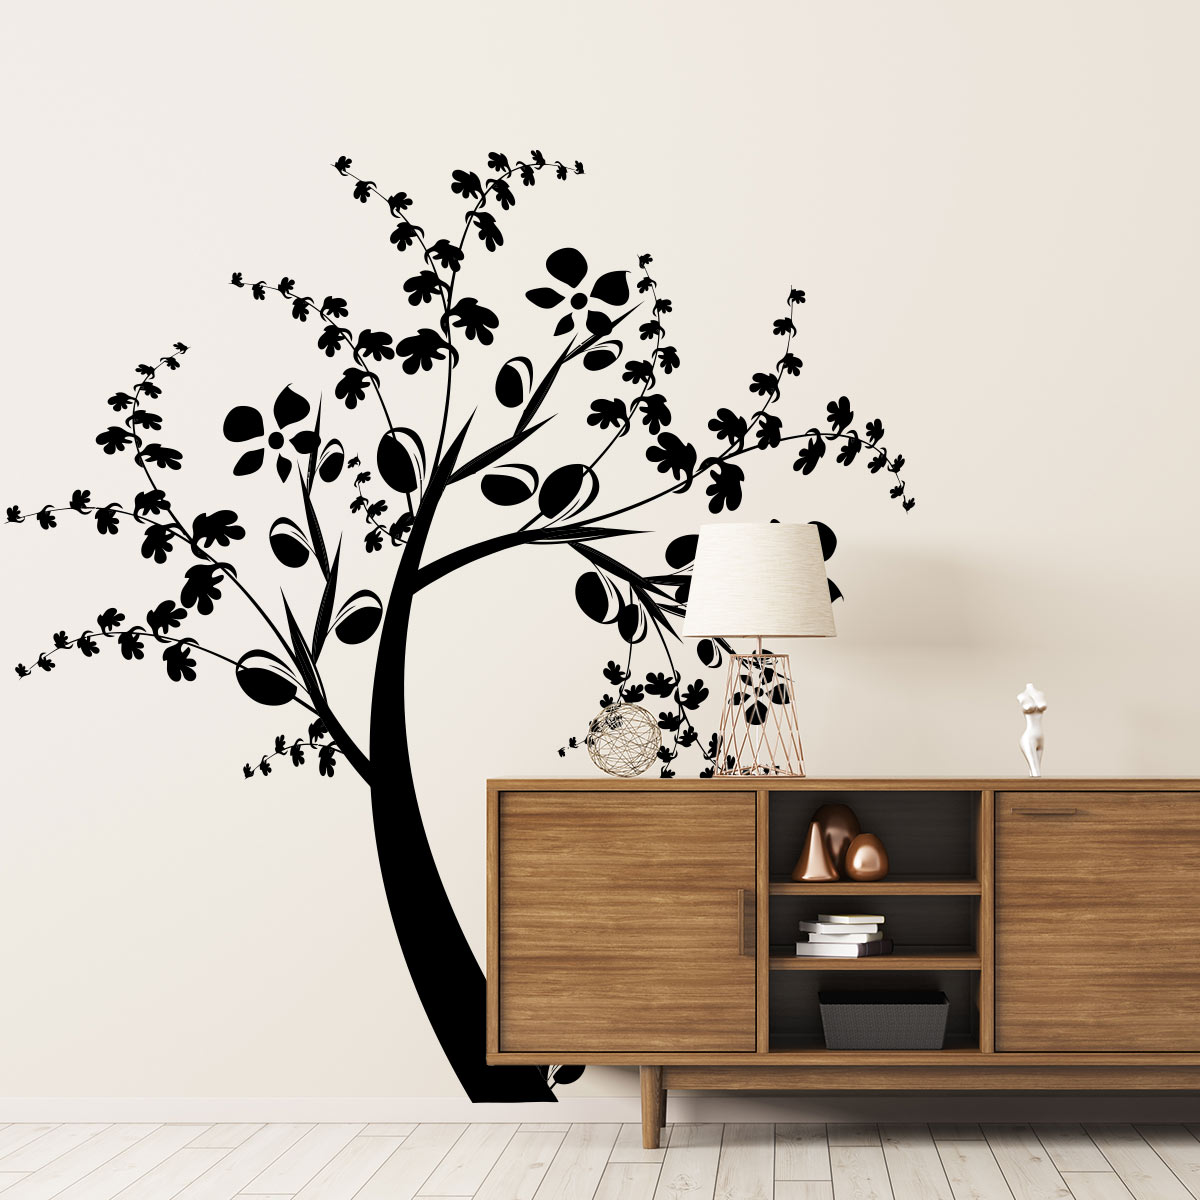 Wall decal tree and its fruits